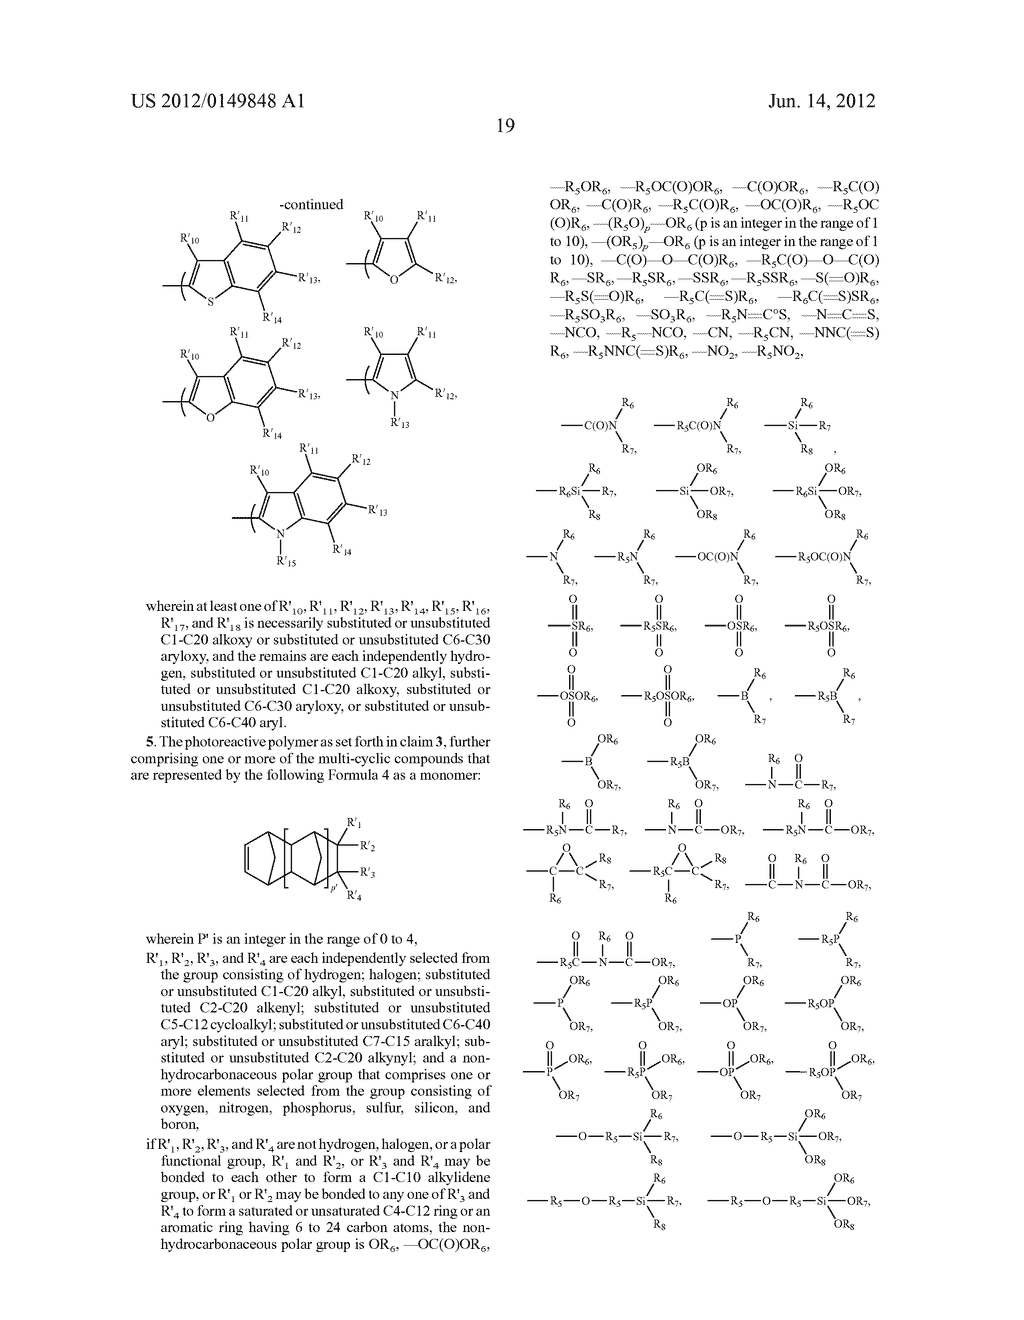 PHOTOREACTIVE POLYMER AND METHOD FOR PREPARING THE SAME - diagram, schematic, and image 21